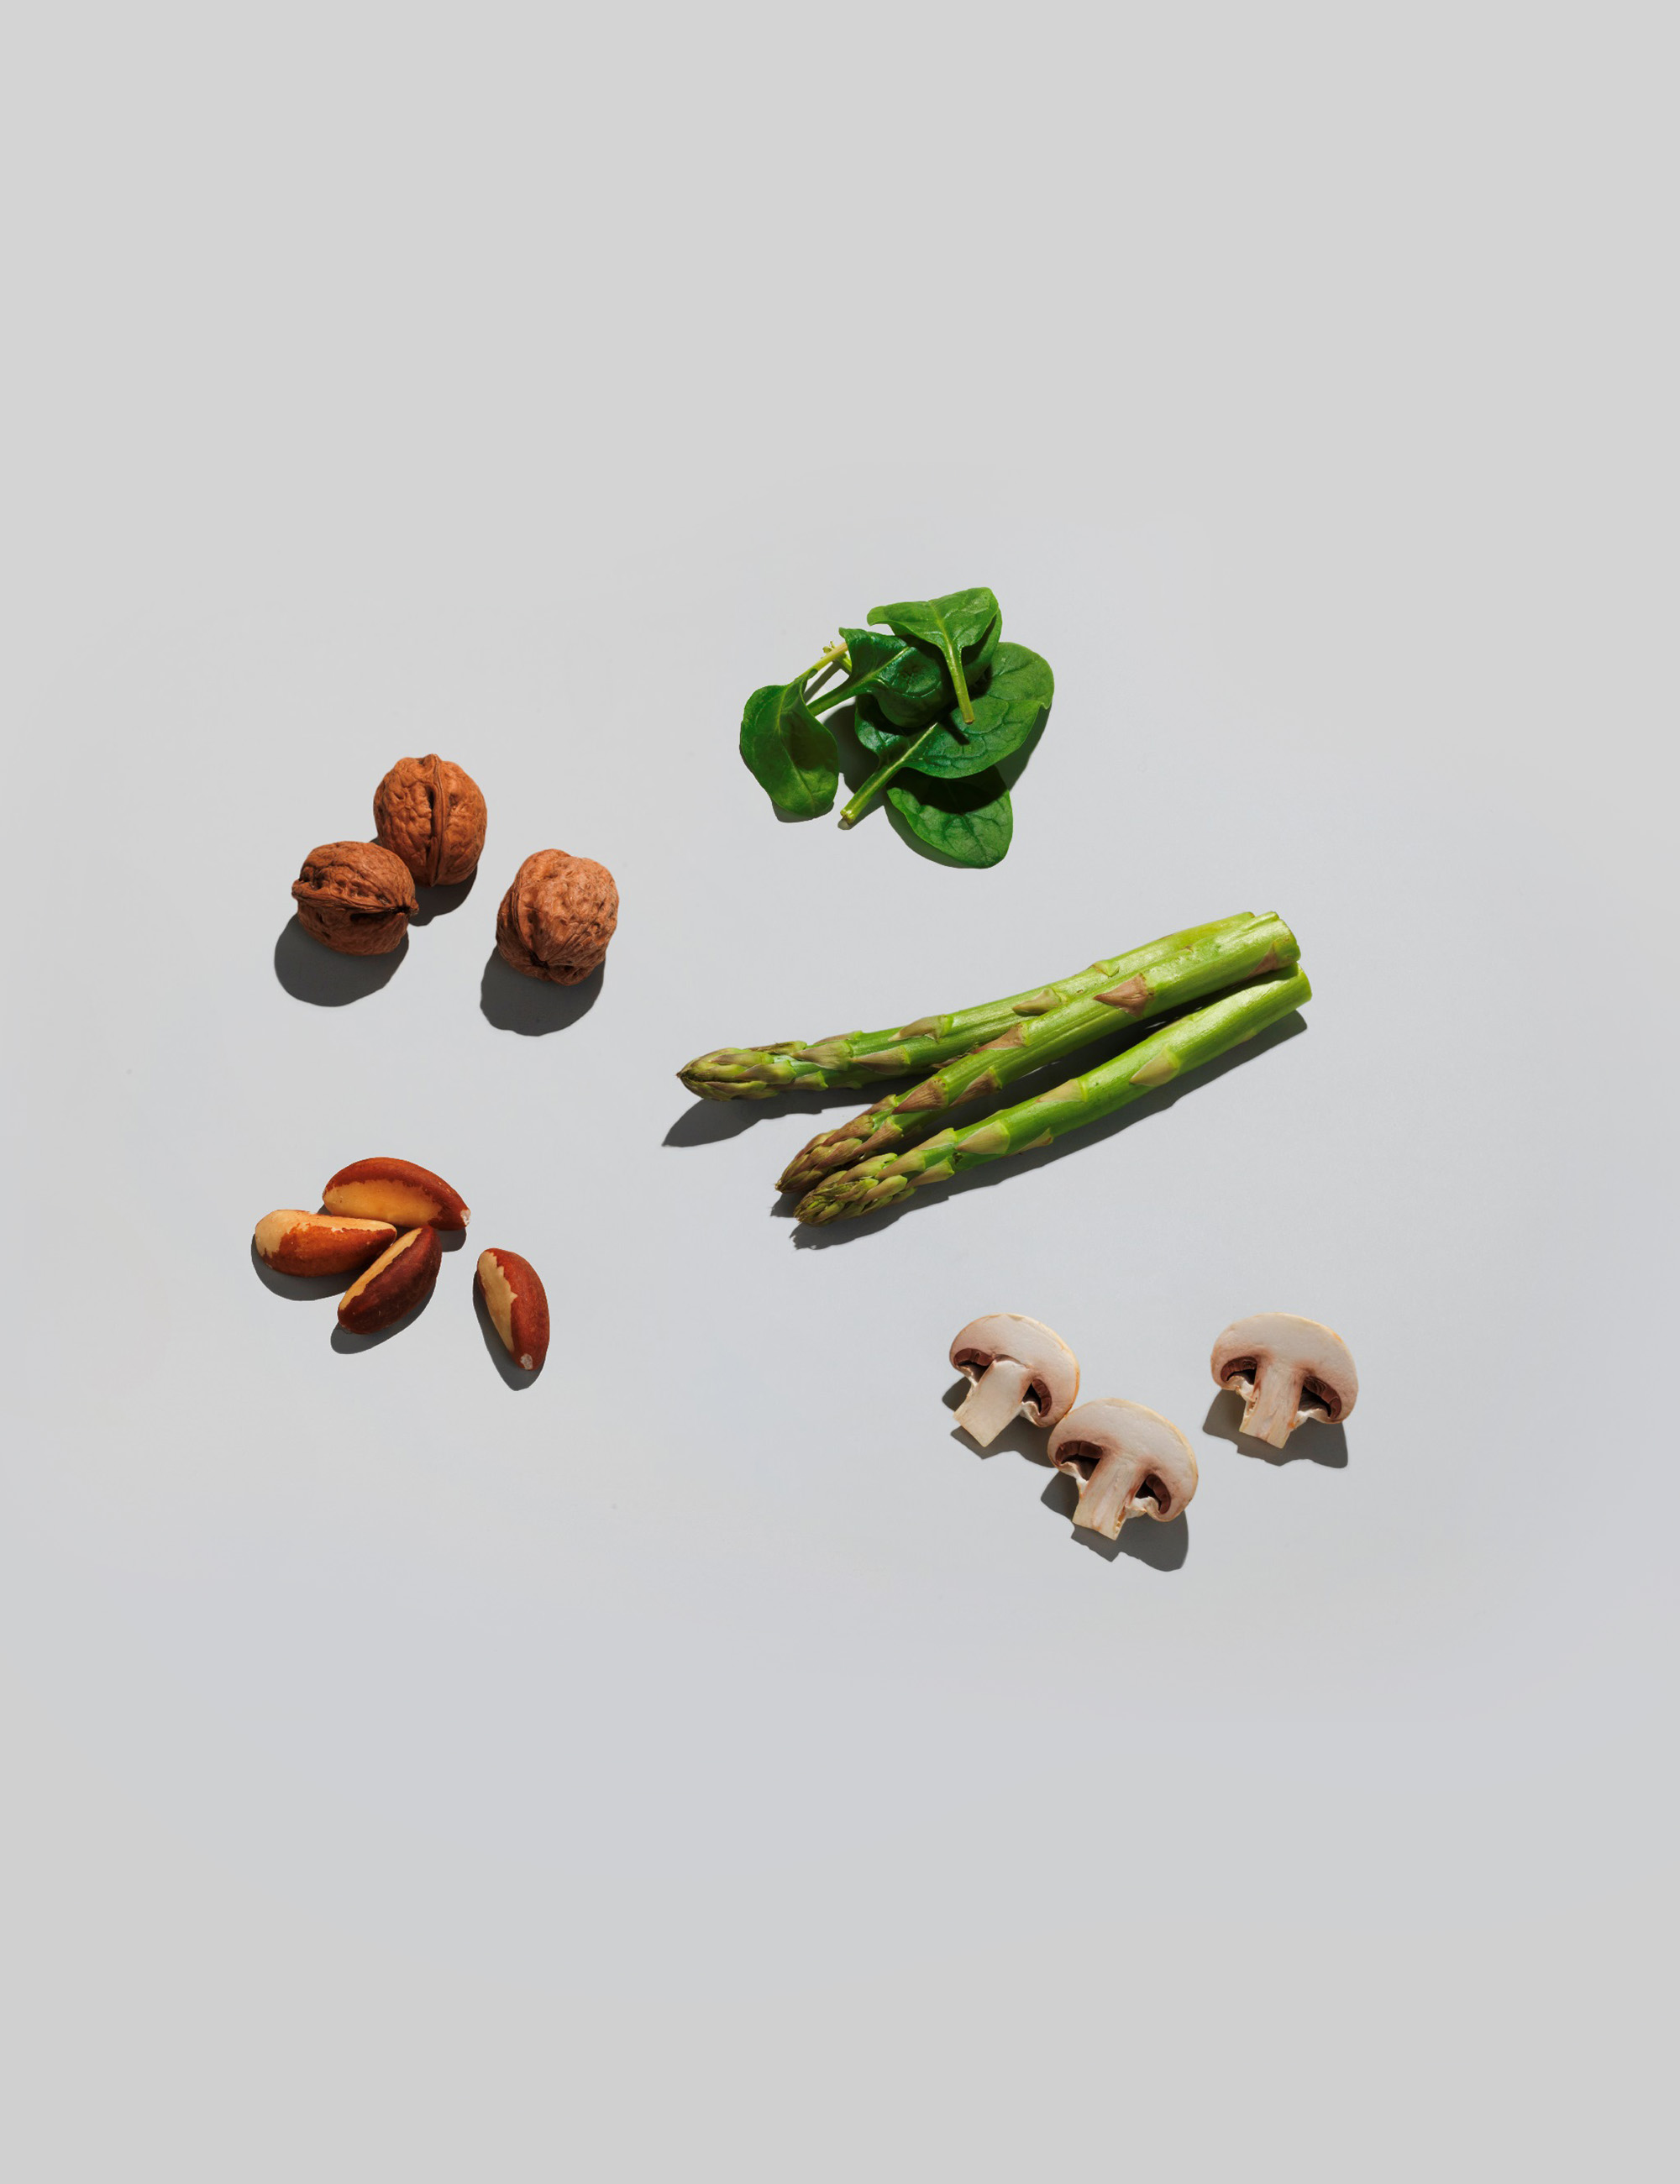 Vegetables and nuts containing Trace Mineral selenium